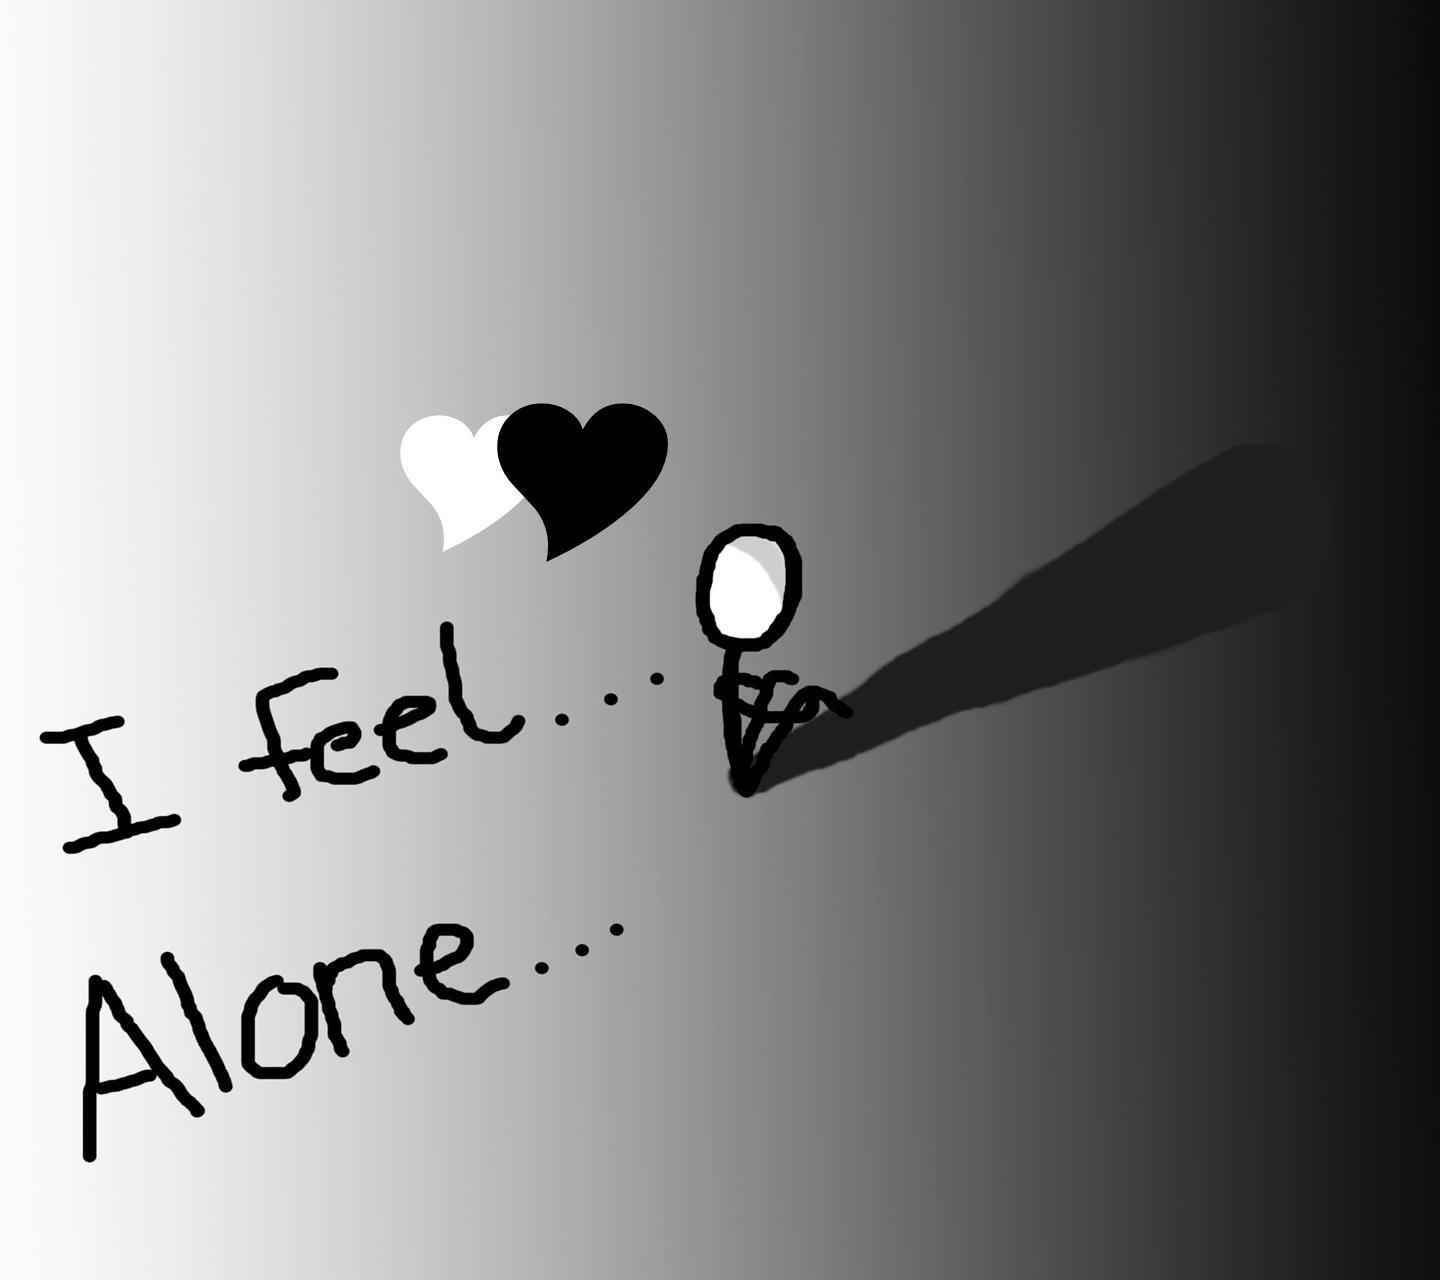 Alone Love Sad Wallpapers - Top Free Alone Love Sad Backgrounds ...